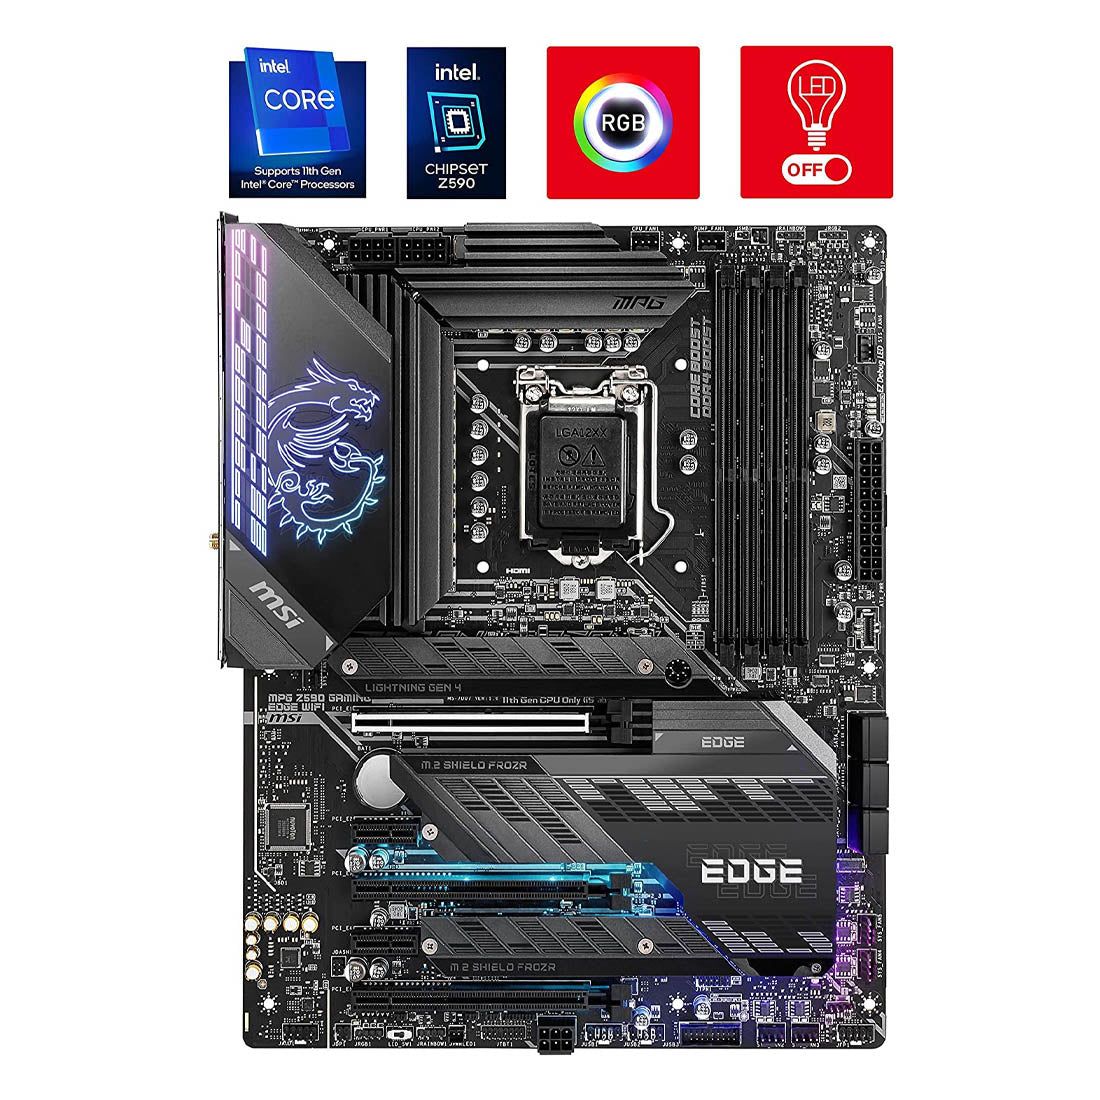 MSI MPG Z590 Gaming Edge WiFi LGA 1200 ATX Motherboard with WiFi 6E Antenna and Frozr AI Cooling